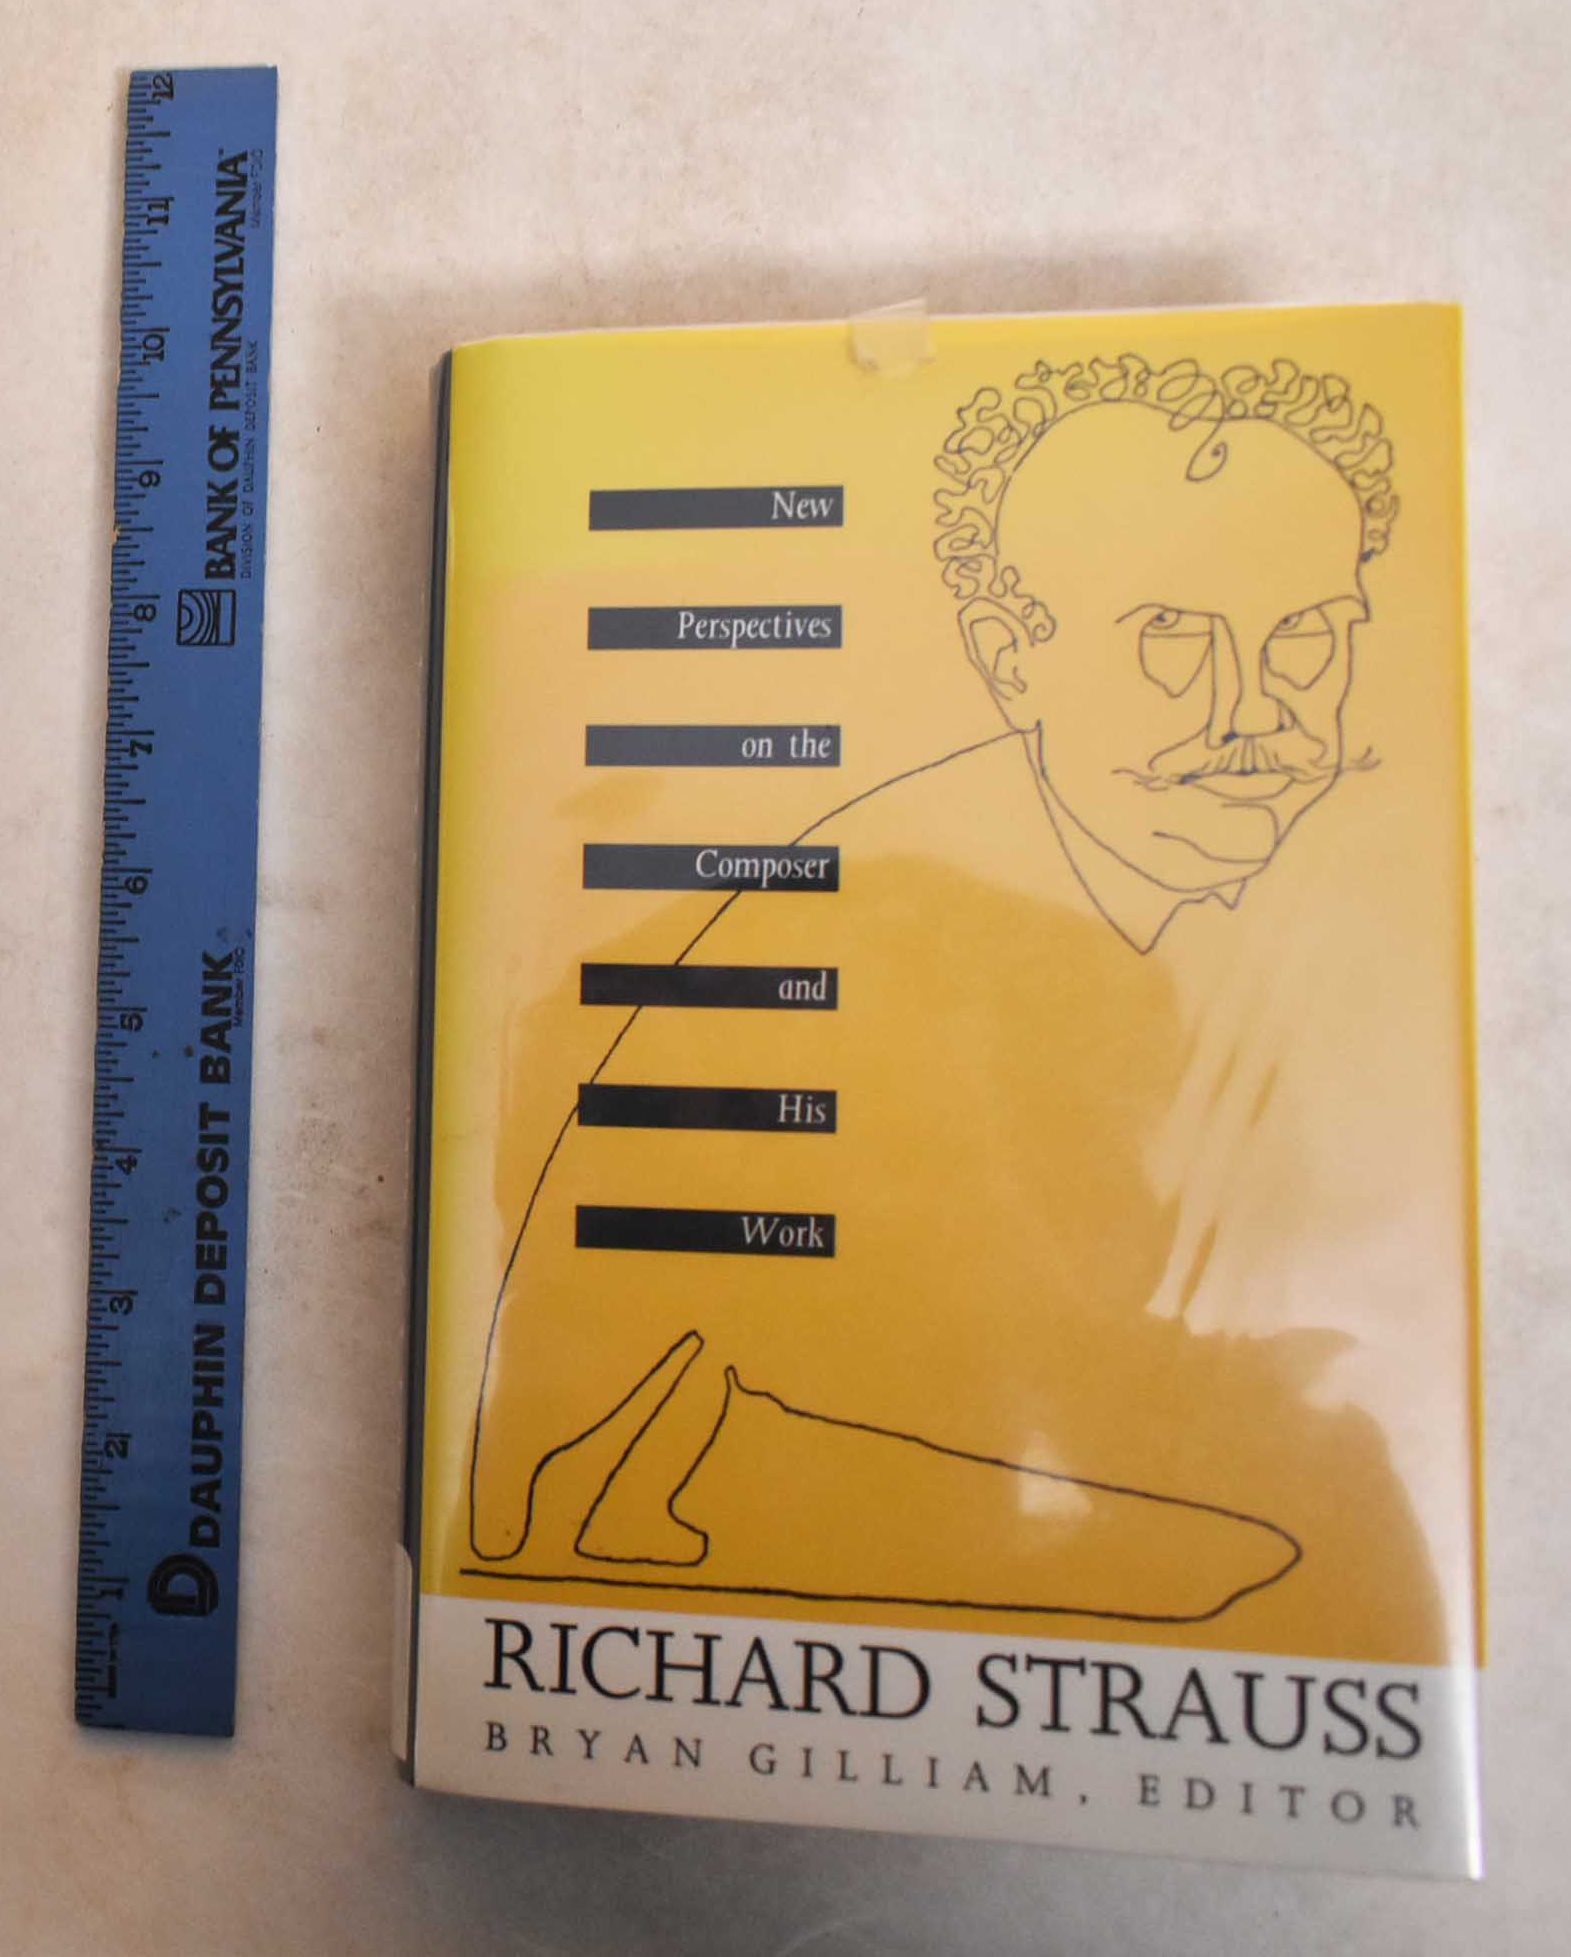 Richard Strauss: New Perspectives on the Composer and His Work - Gilliam, Bryan Randolph